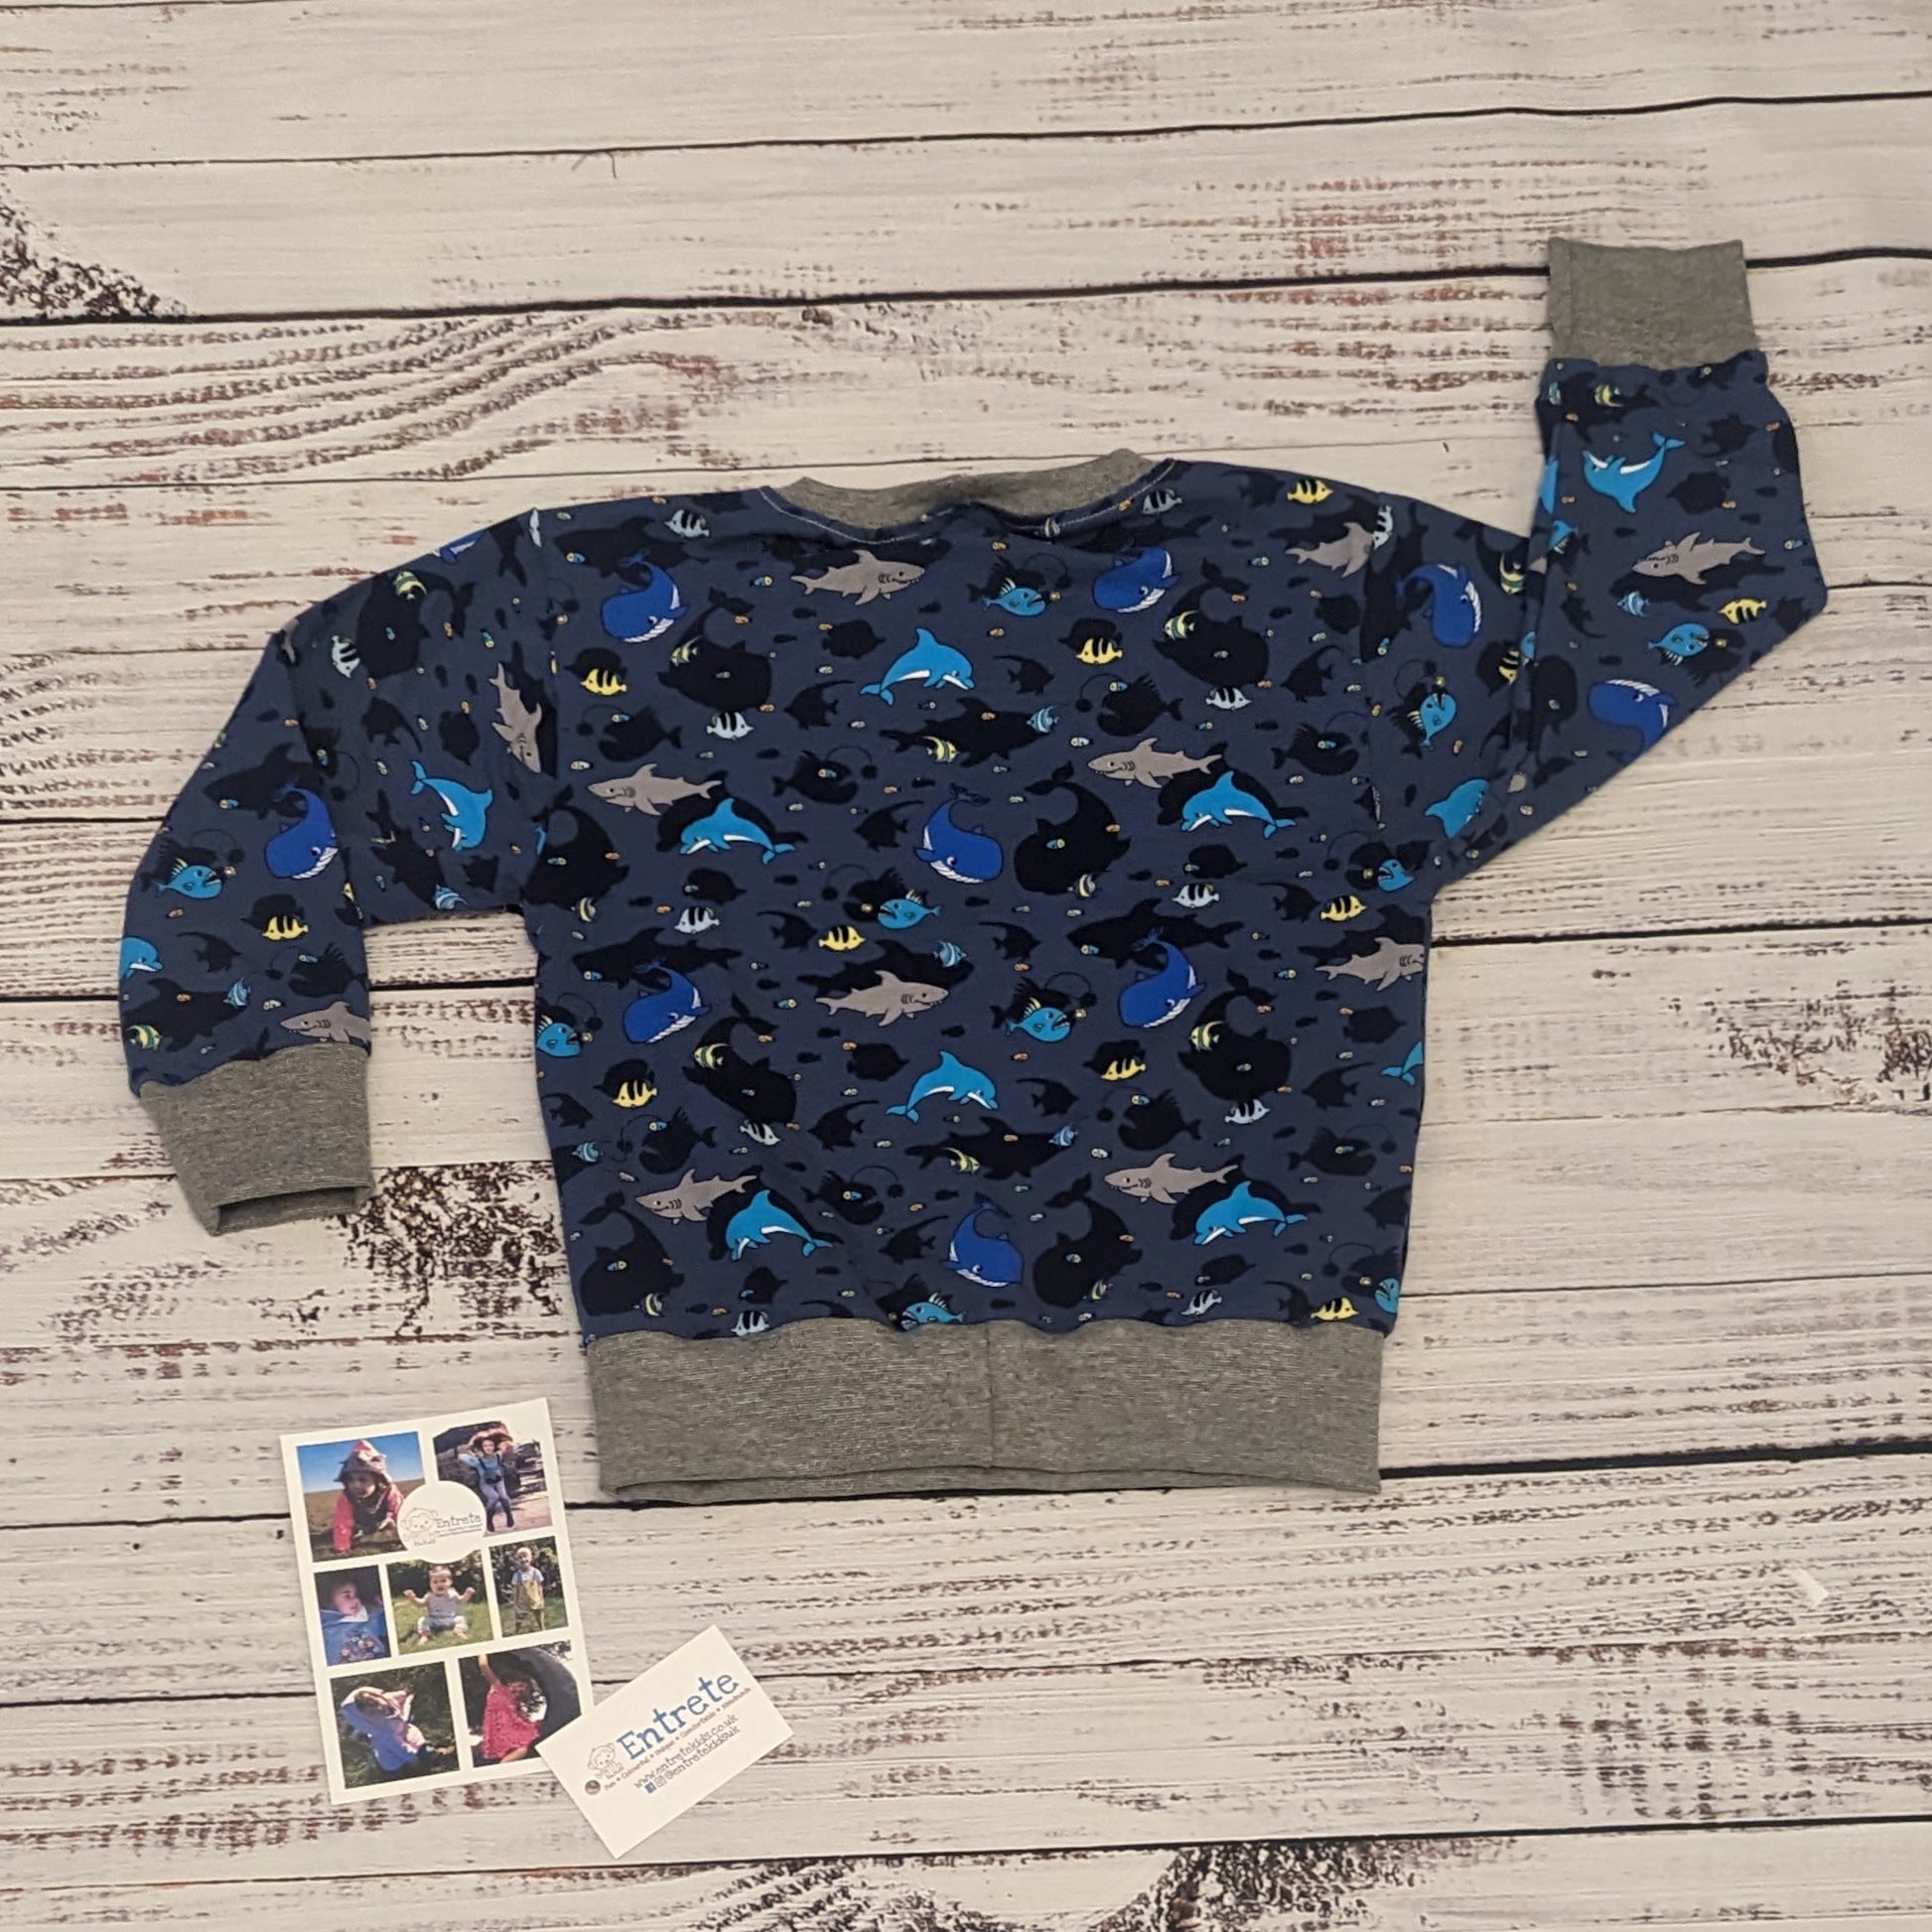 The amazing sea life sweatshirt, packed full of your favourite sea creatures. Handmade using navy sea life shadows cotton jersey and grey cotton ribbing. Shown from the rear.